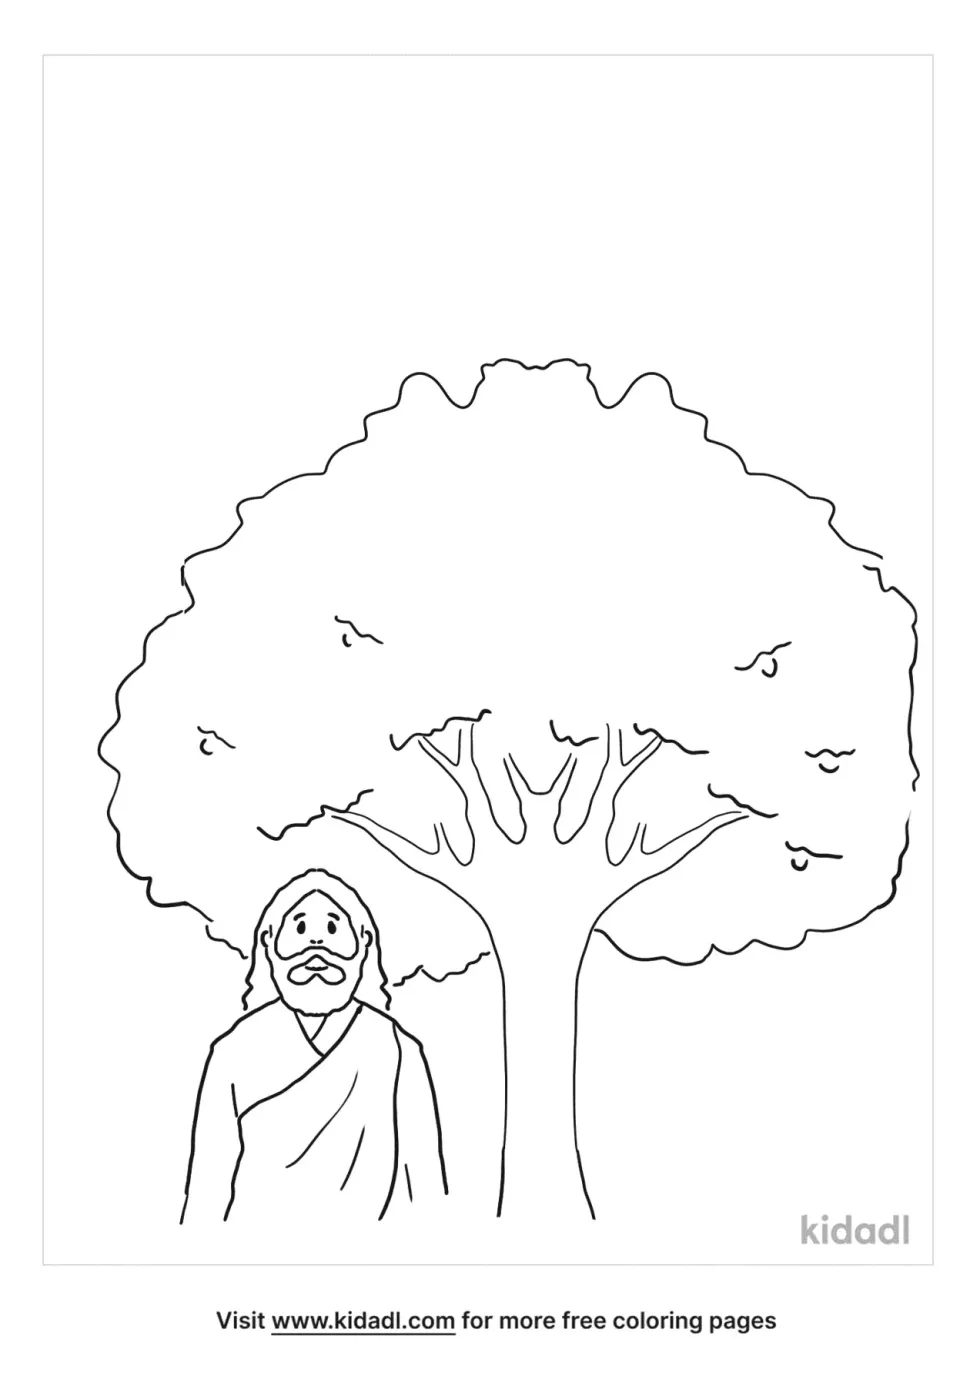 Mustard Tree Coloring Page